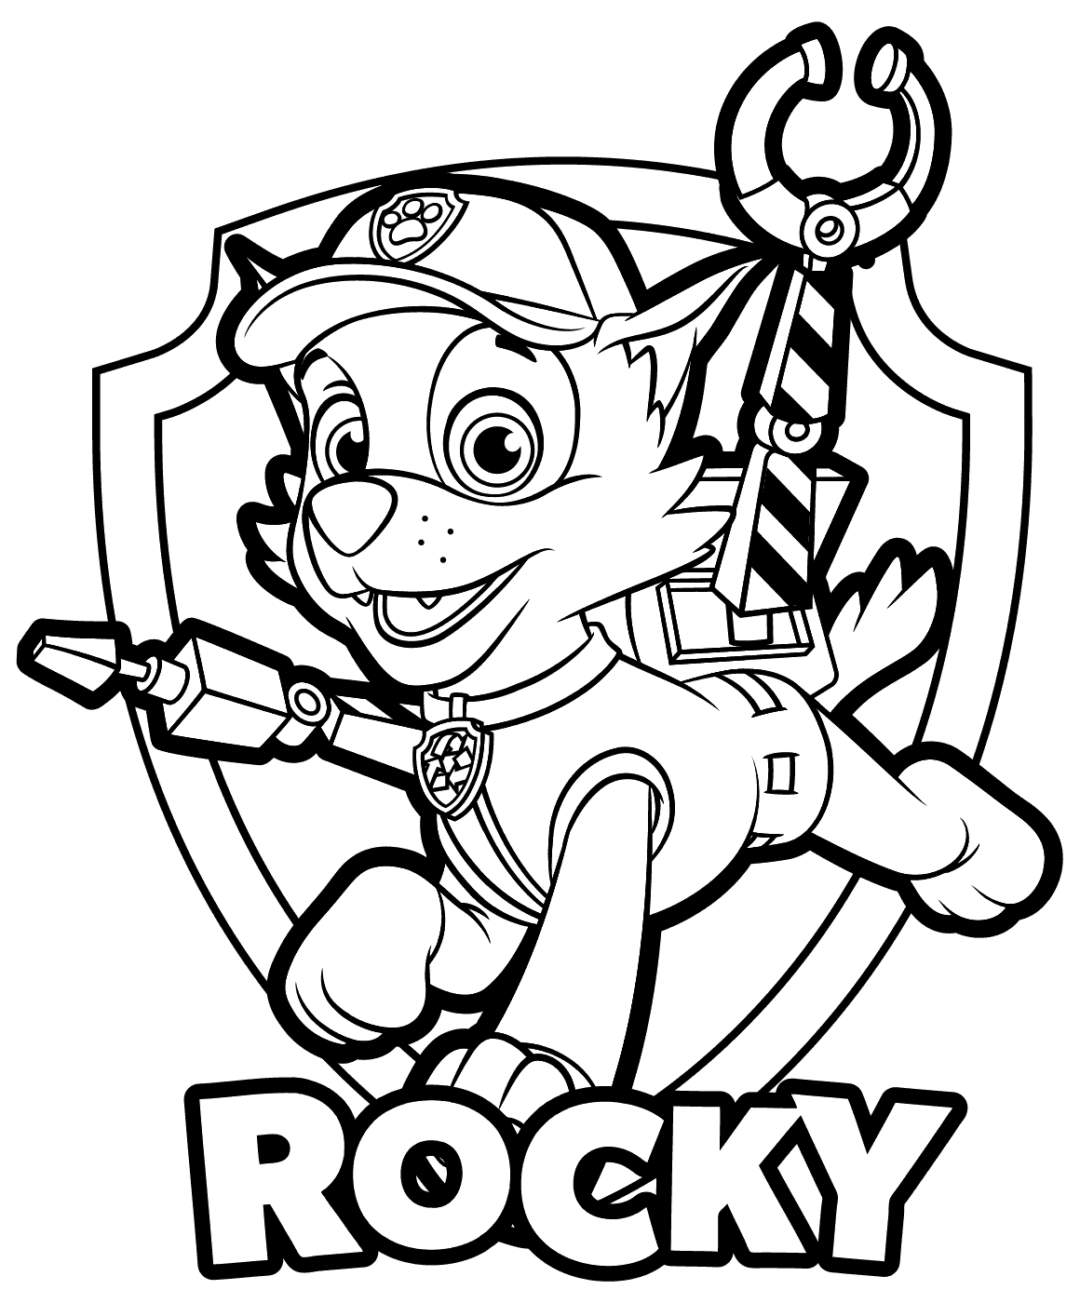 Printable coloring pages paw patrol coloring paw patrol coloring pages paw patrol rocky